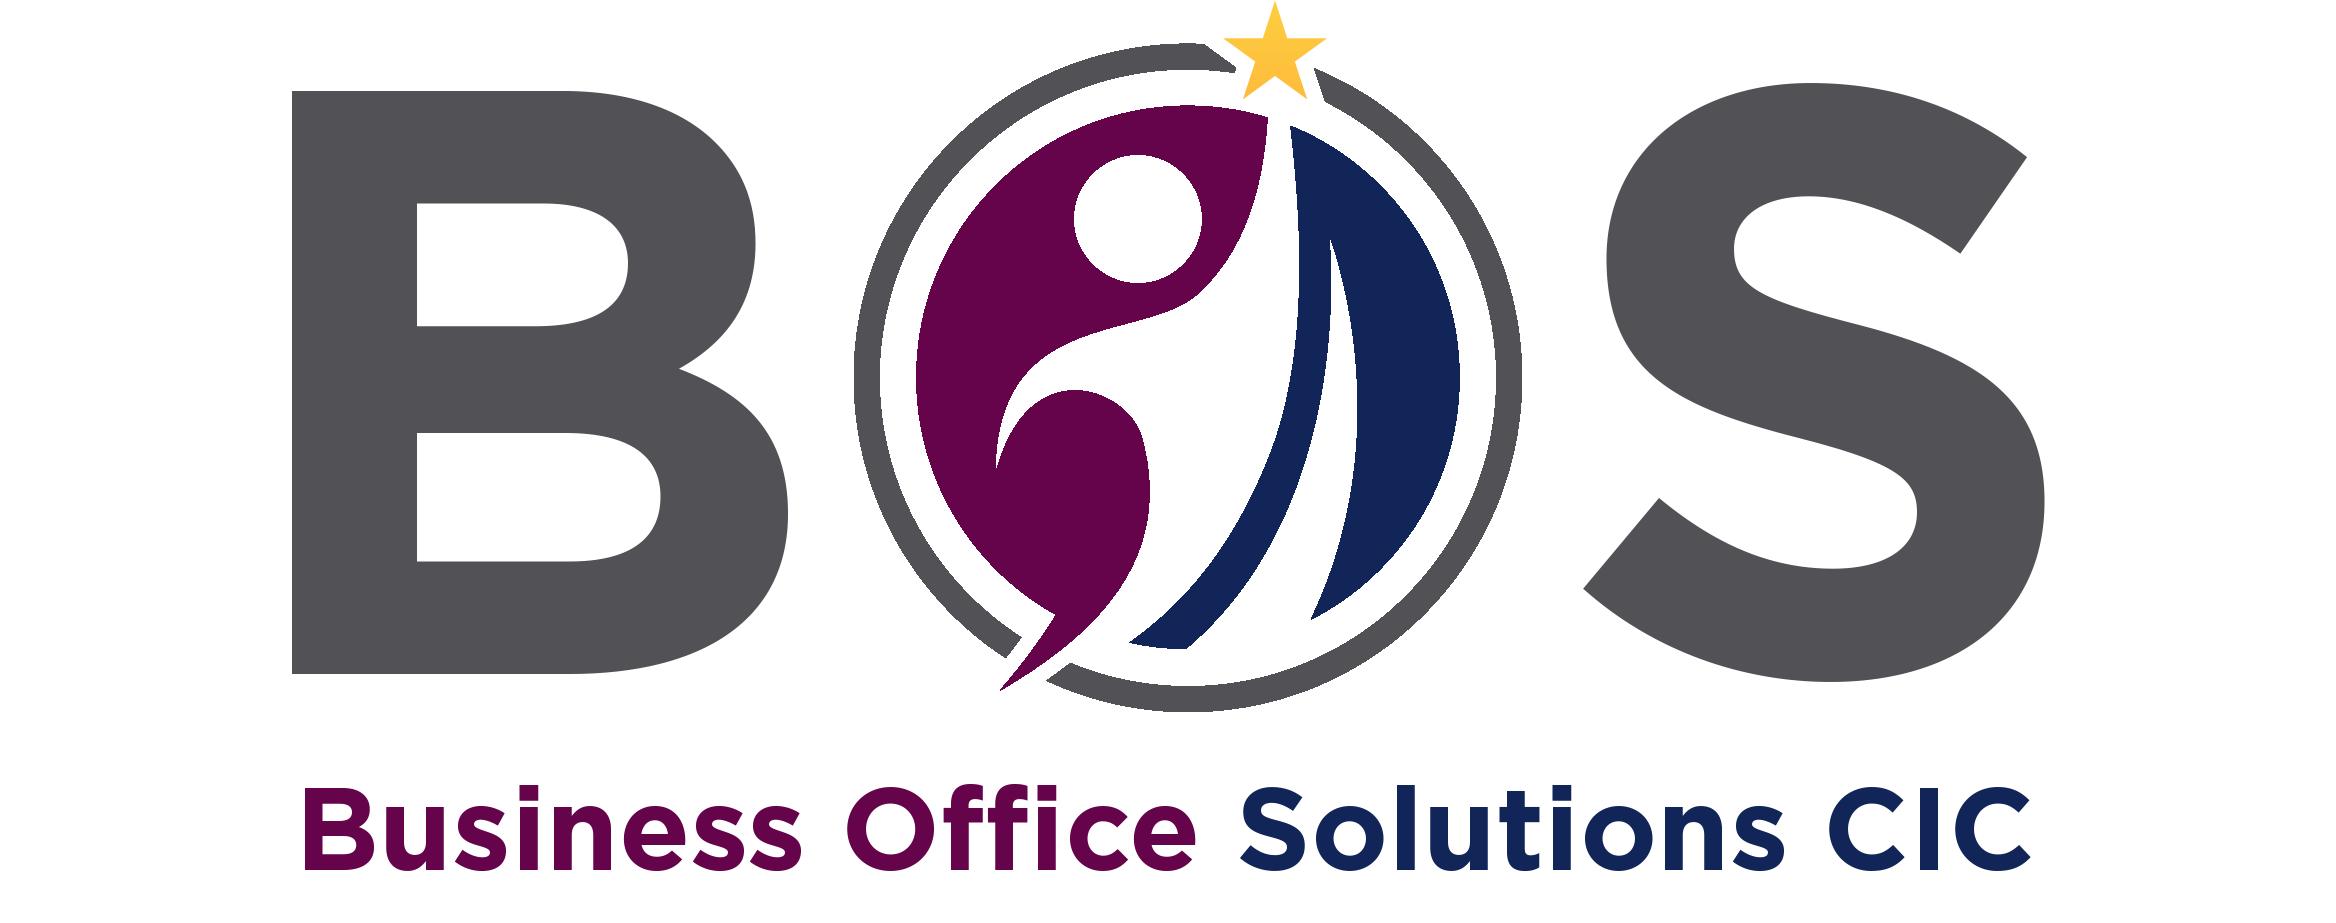 Business Office Solutions CIC